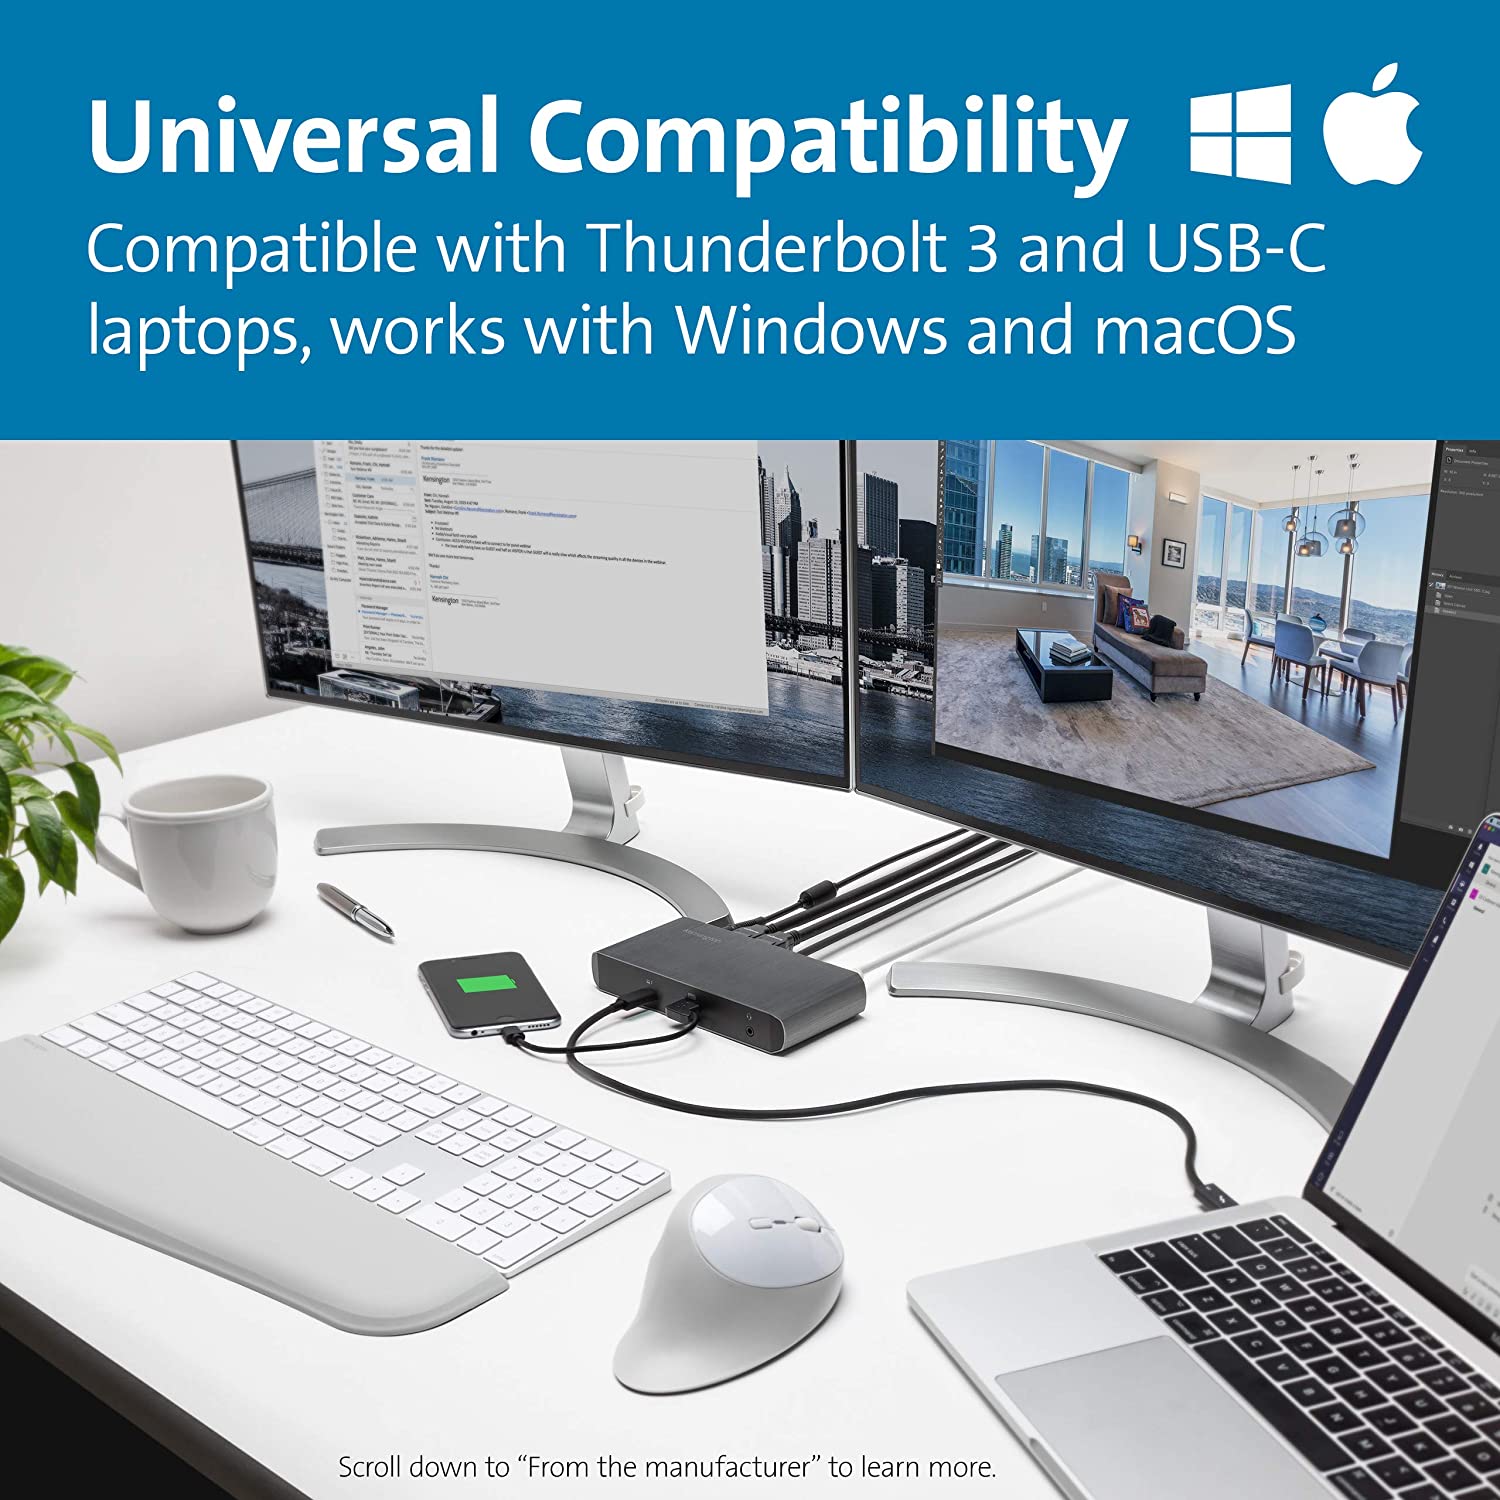 Kensington SD5500T Thunderbolt 3 and USB-C Docking Station, Dual 4K DisplayPort, for Macbooks, Windows and Surface, 60W PD (K38130US)